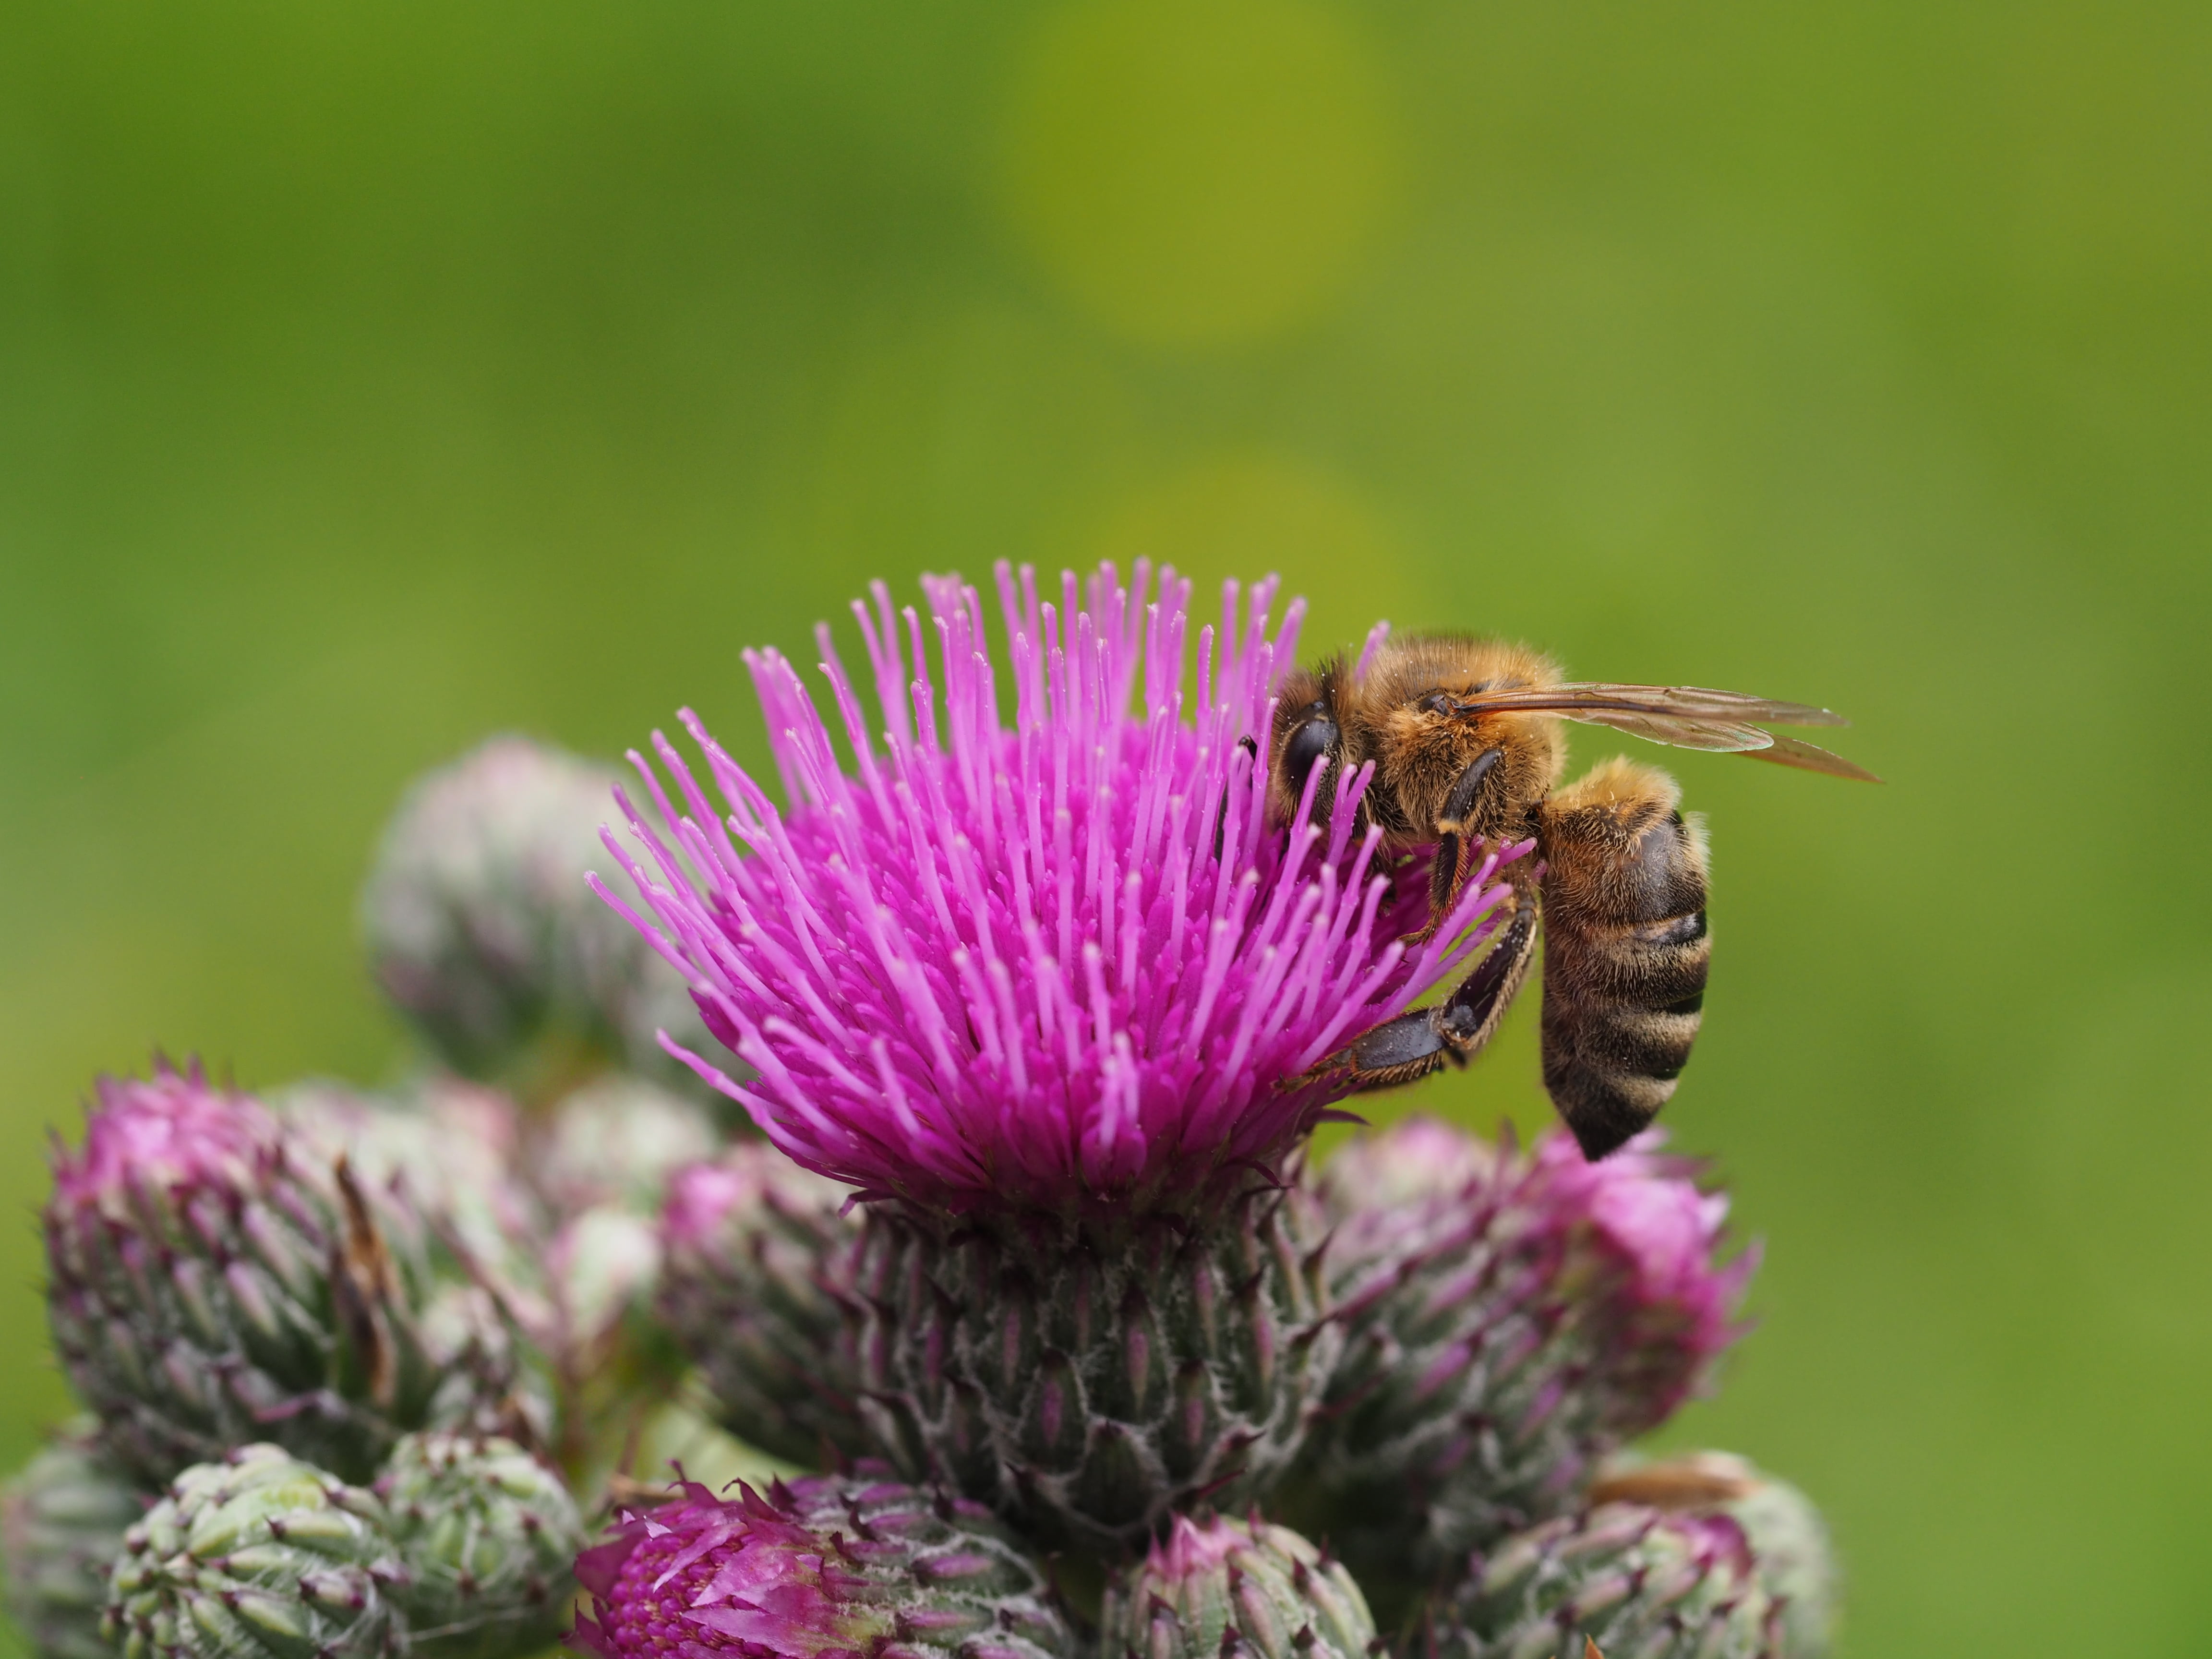 yellow bee on pink flower plant, Distel, insect, blossom, purple